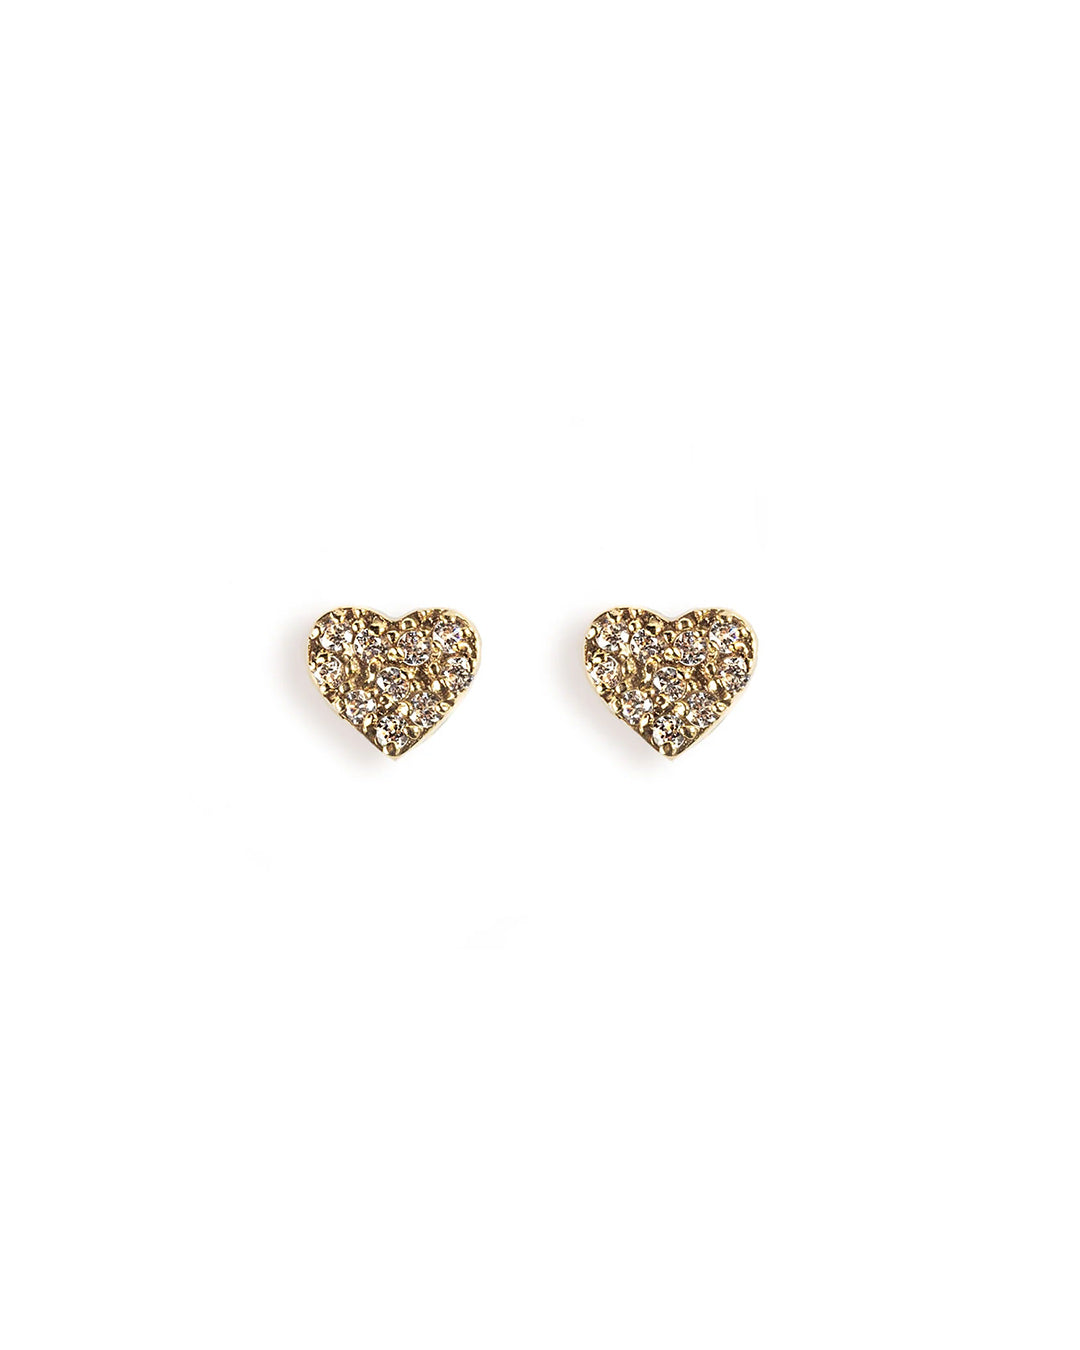 14K HEART EARRINGS WITH CRYSTALS